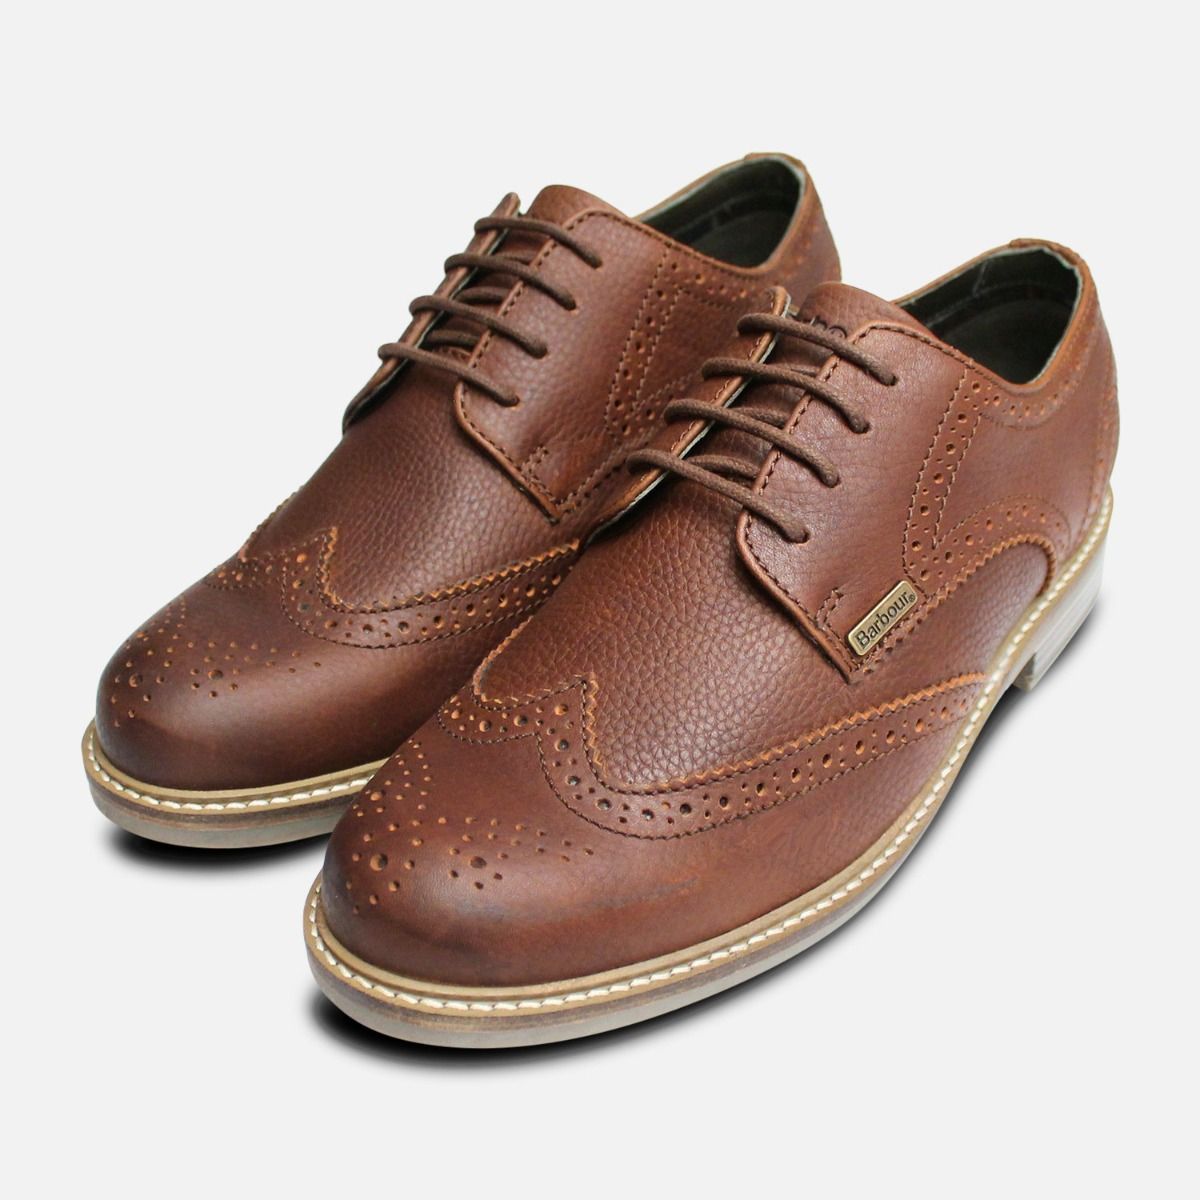 Barbour Derby Lace Up Brogue Shoes in 